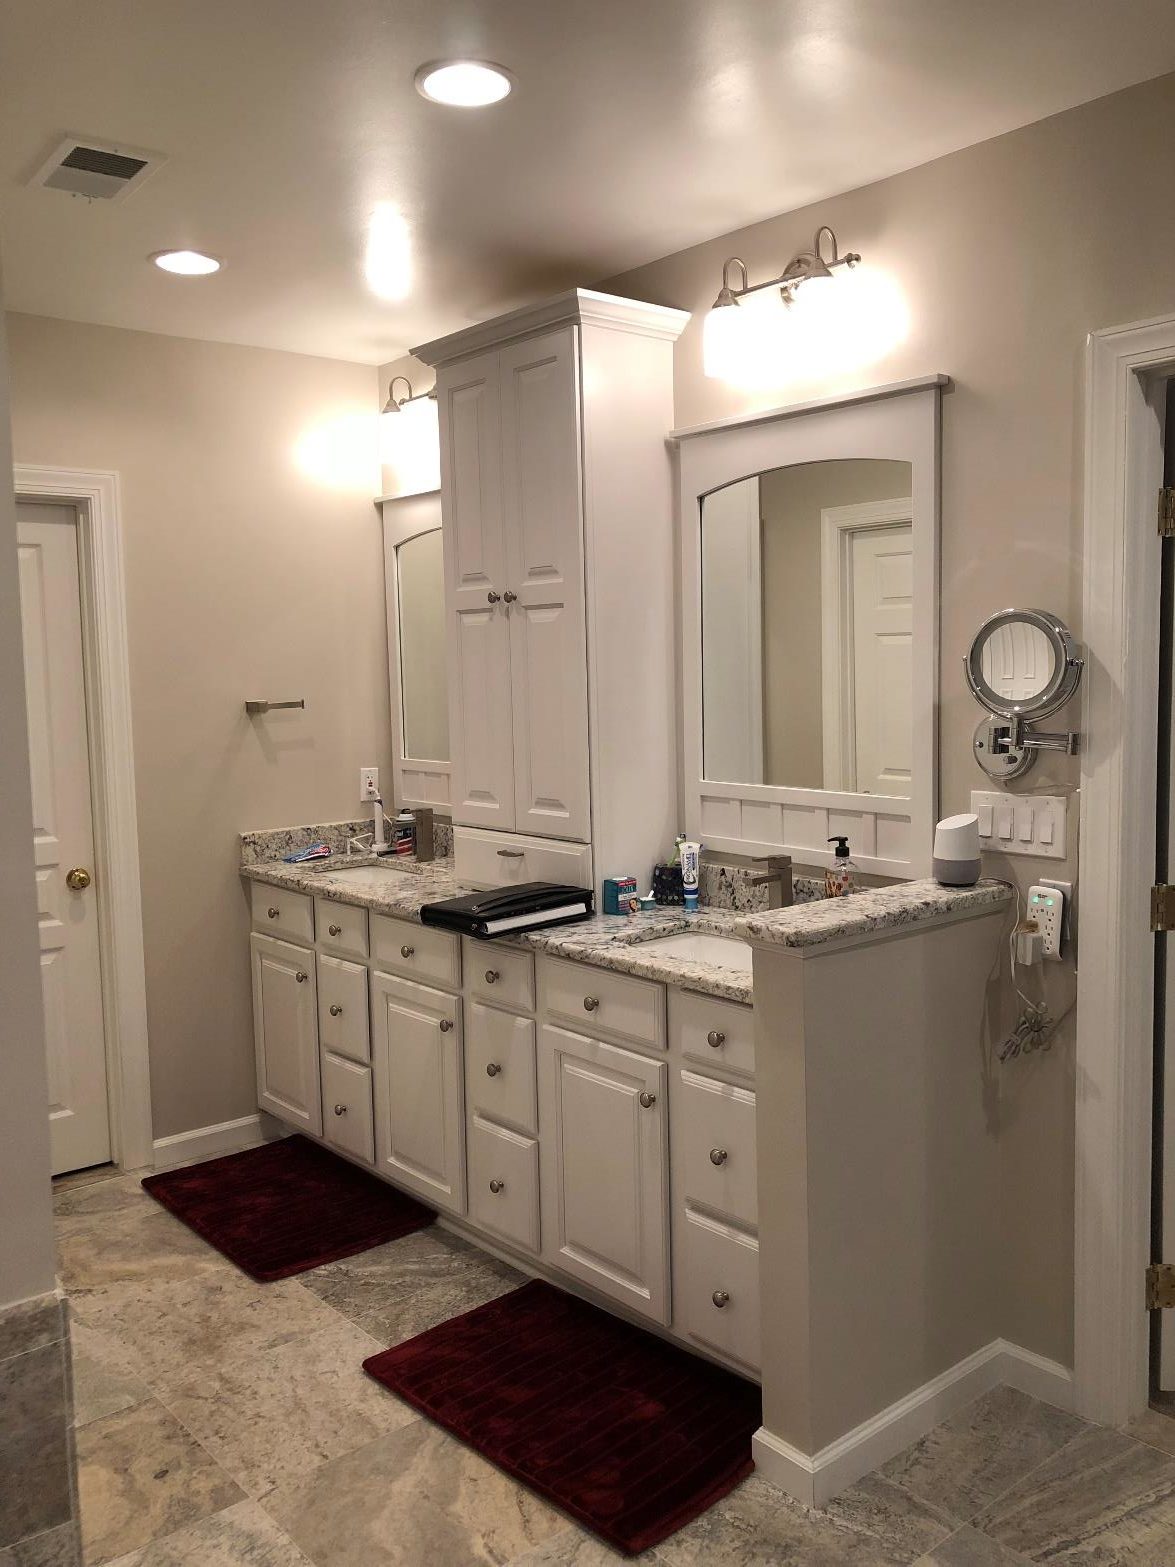 Bathroom sink and cabinets installation